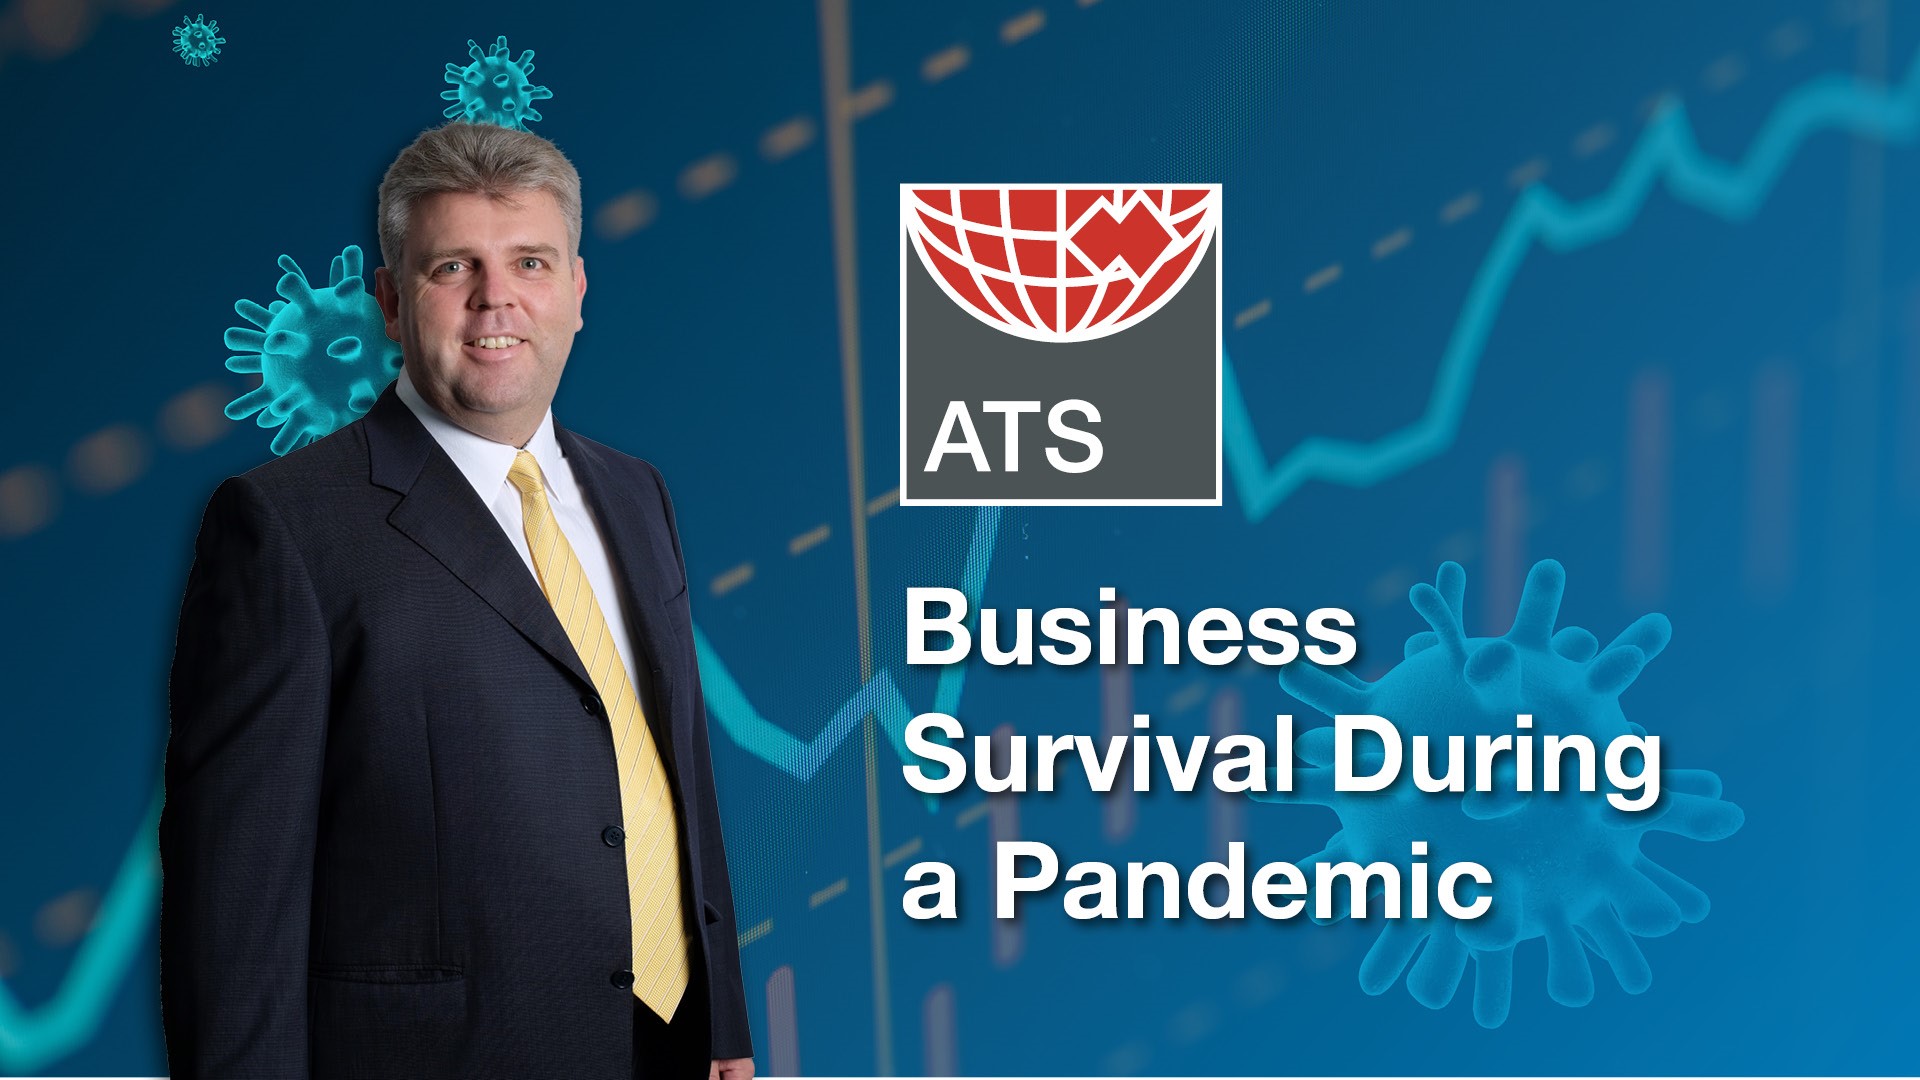 Business survival plan during the pandemic